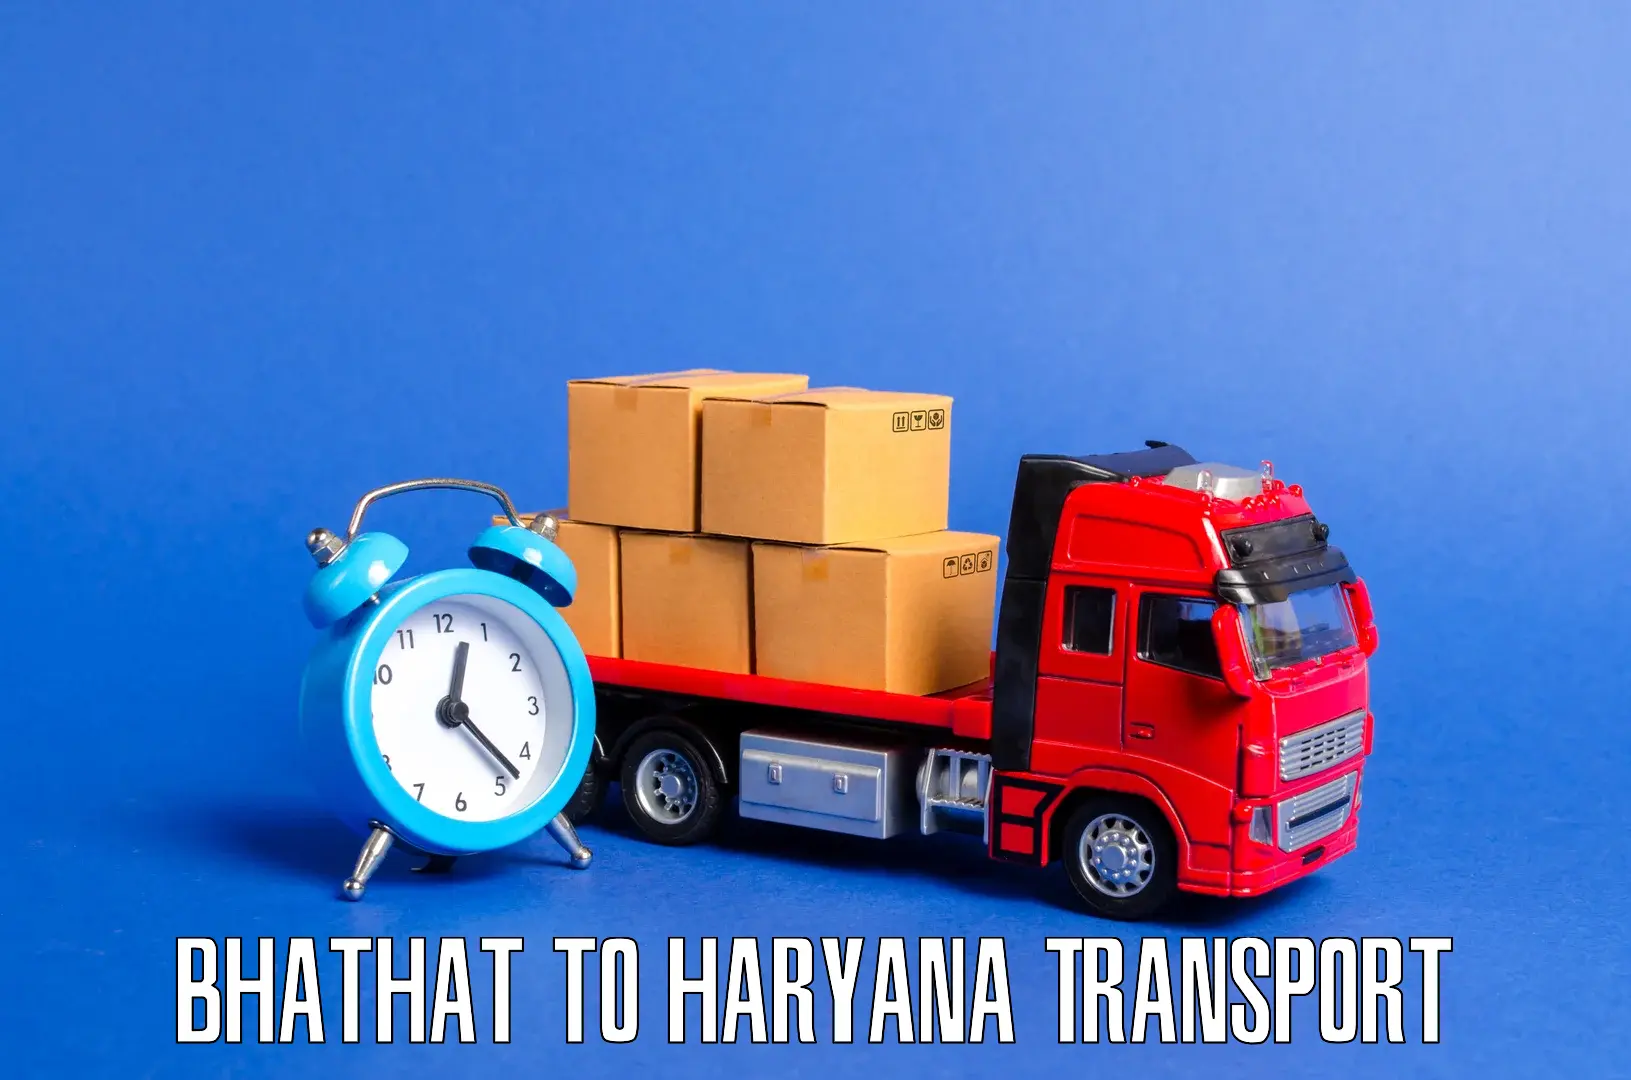 Air cargo transport services in Bhathat to Gurugram